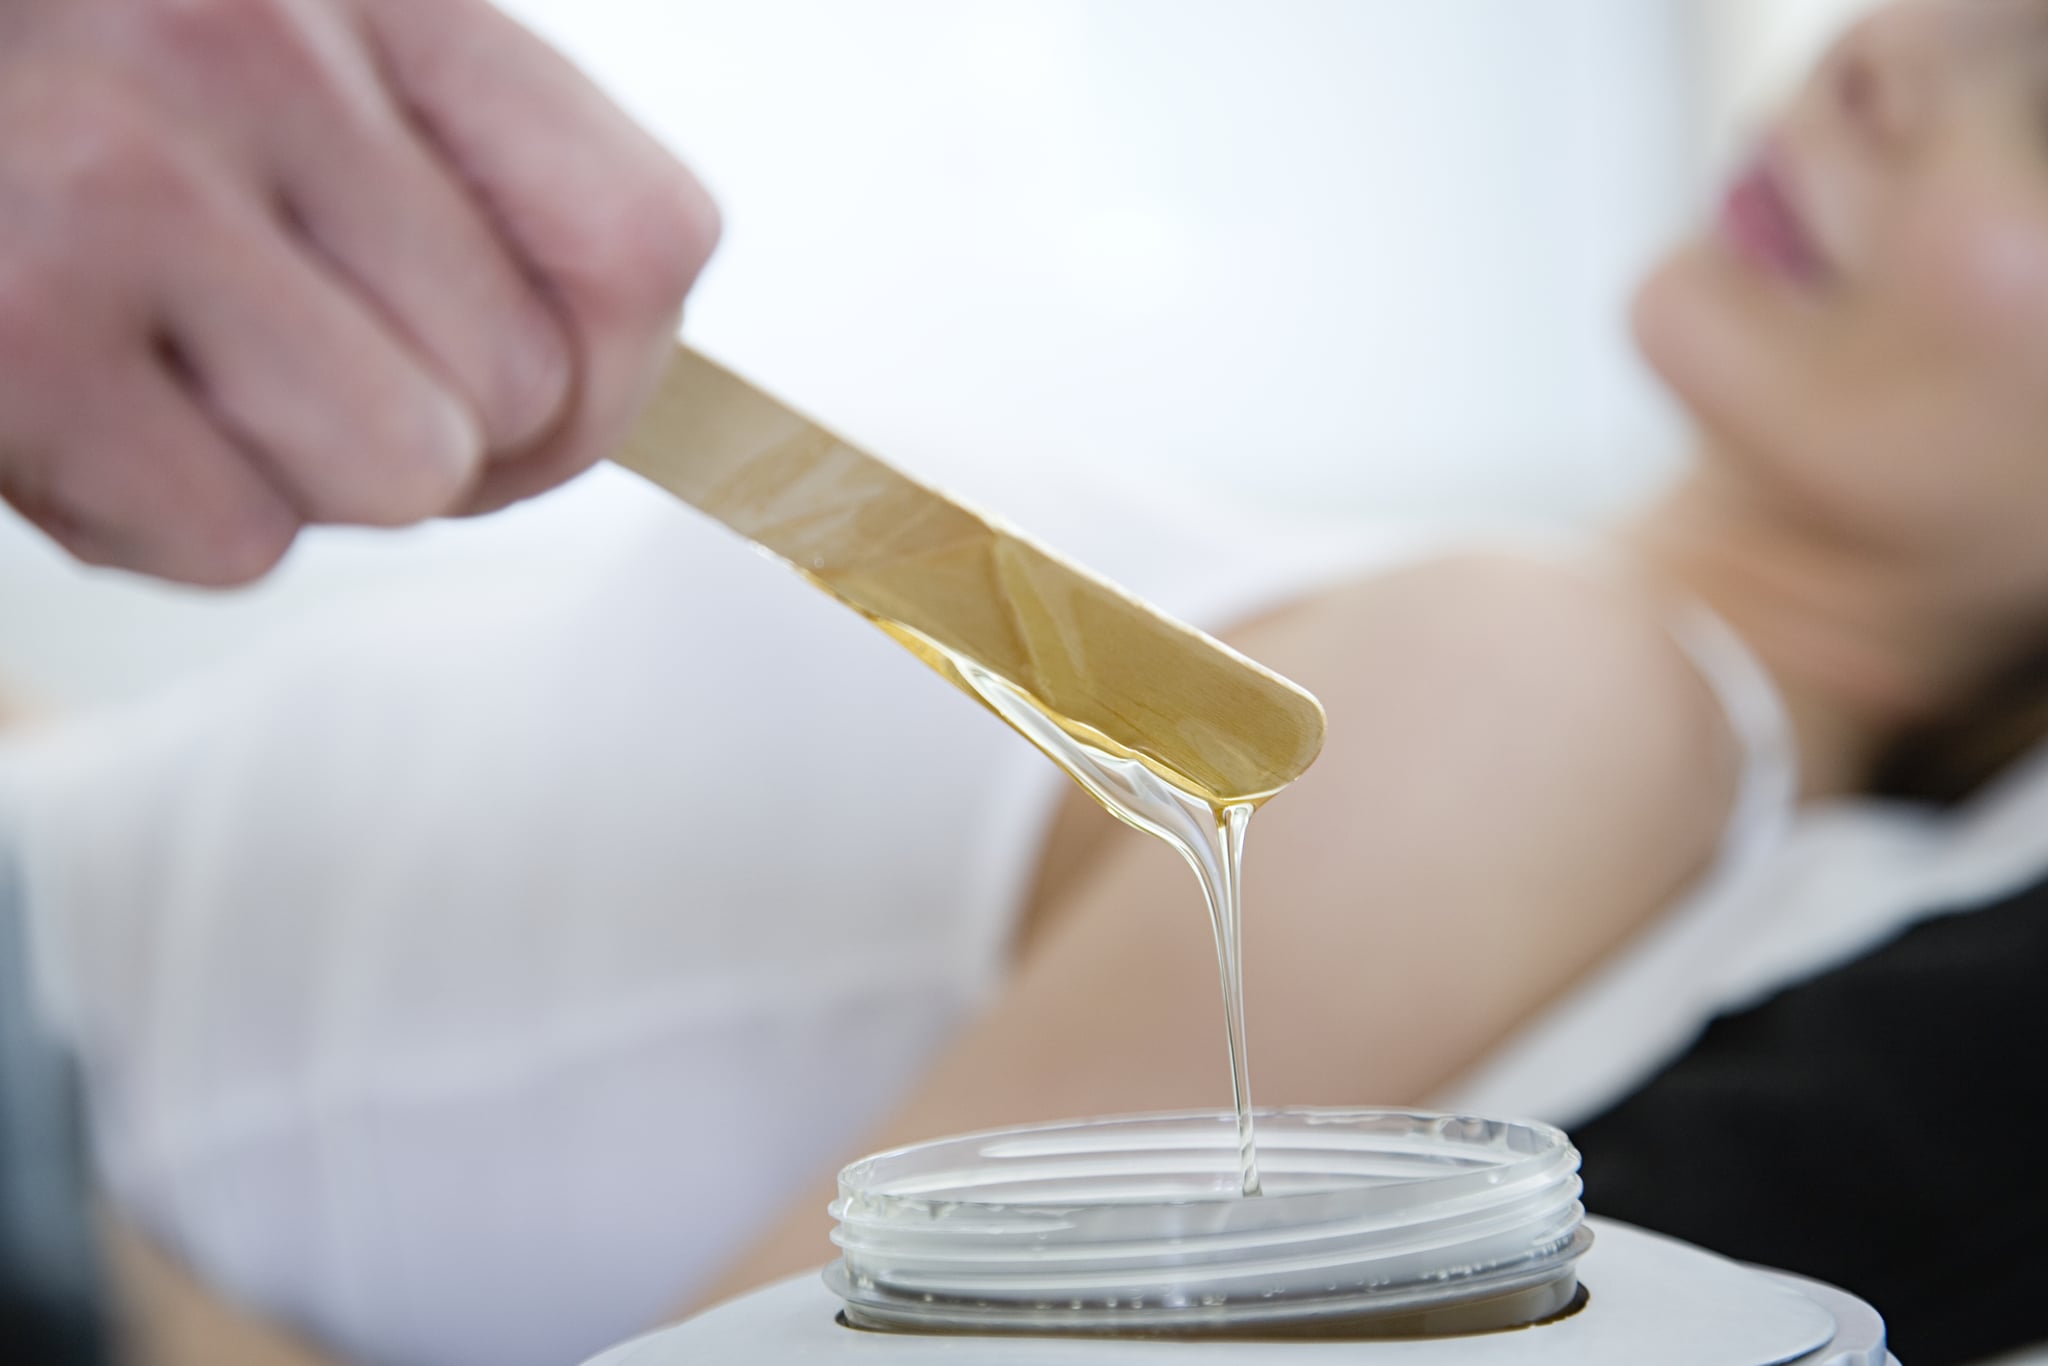 Here’s What You Should Know About Using Numbing Creams Before Waxing